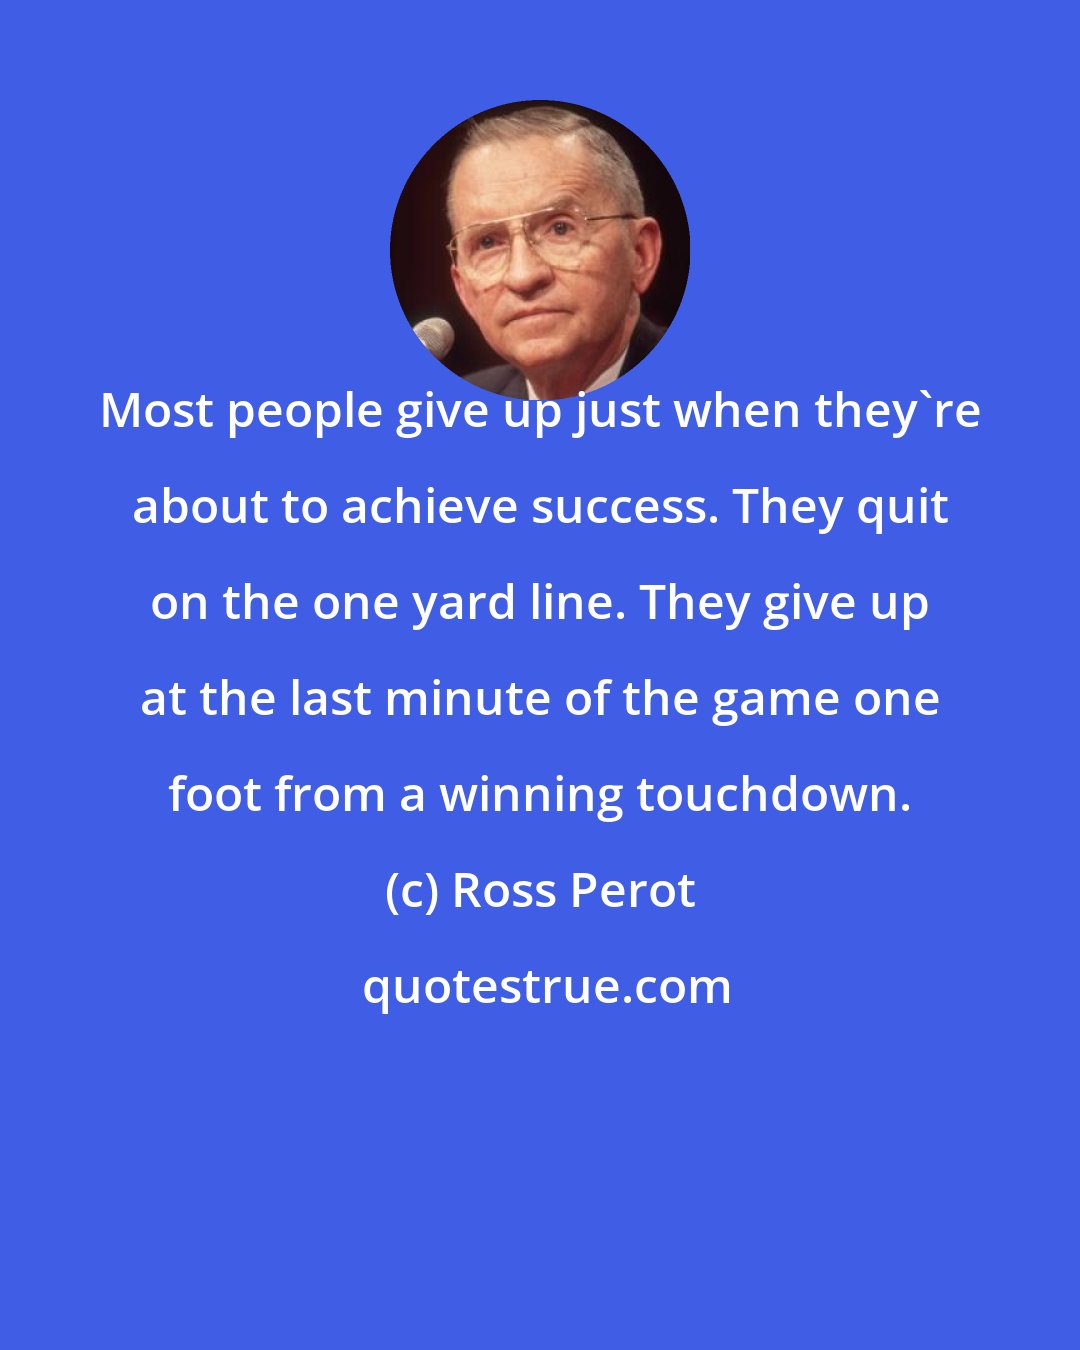 Ross Perot: Most people give up just when they're about to achieve success. They quit on the one yard line. They give up at the last minute of the game one foot from a winning touchdown.